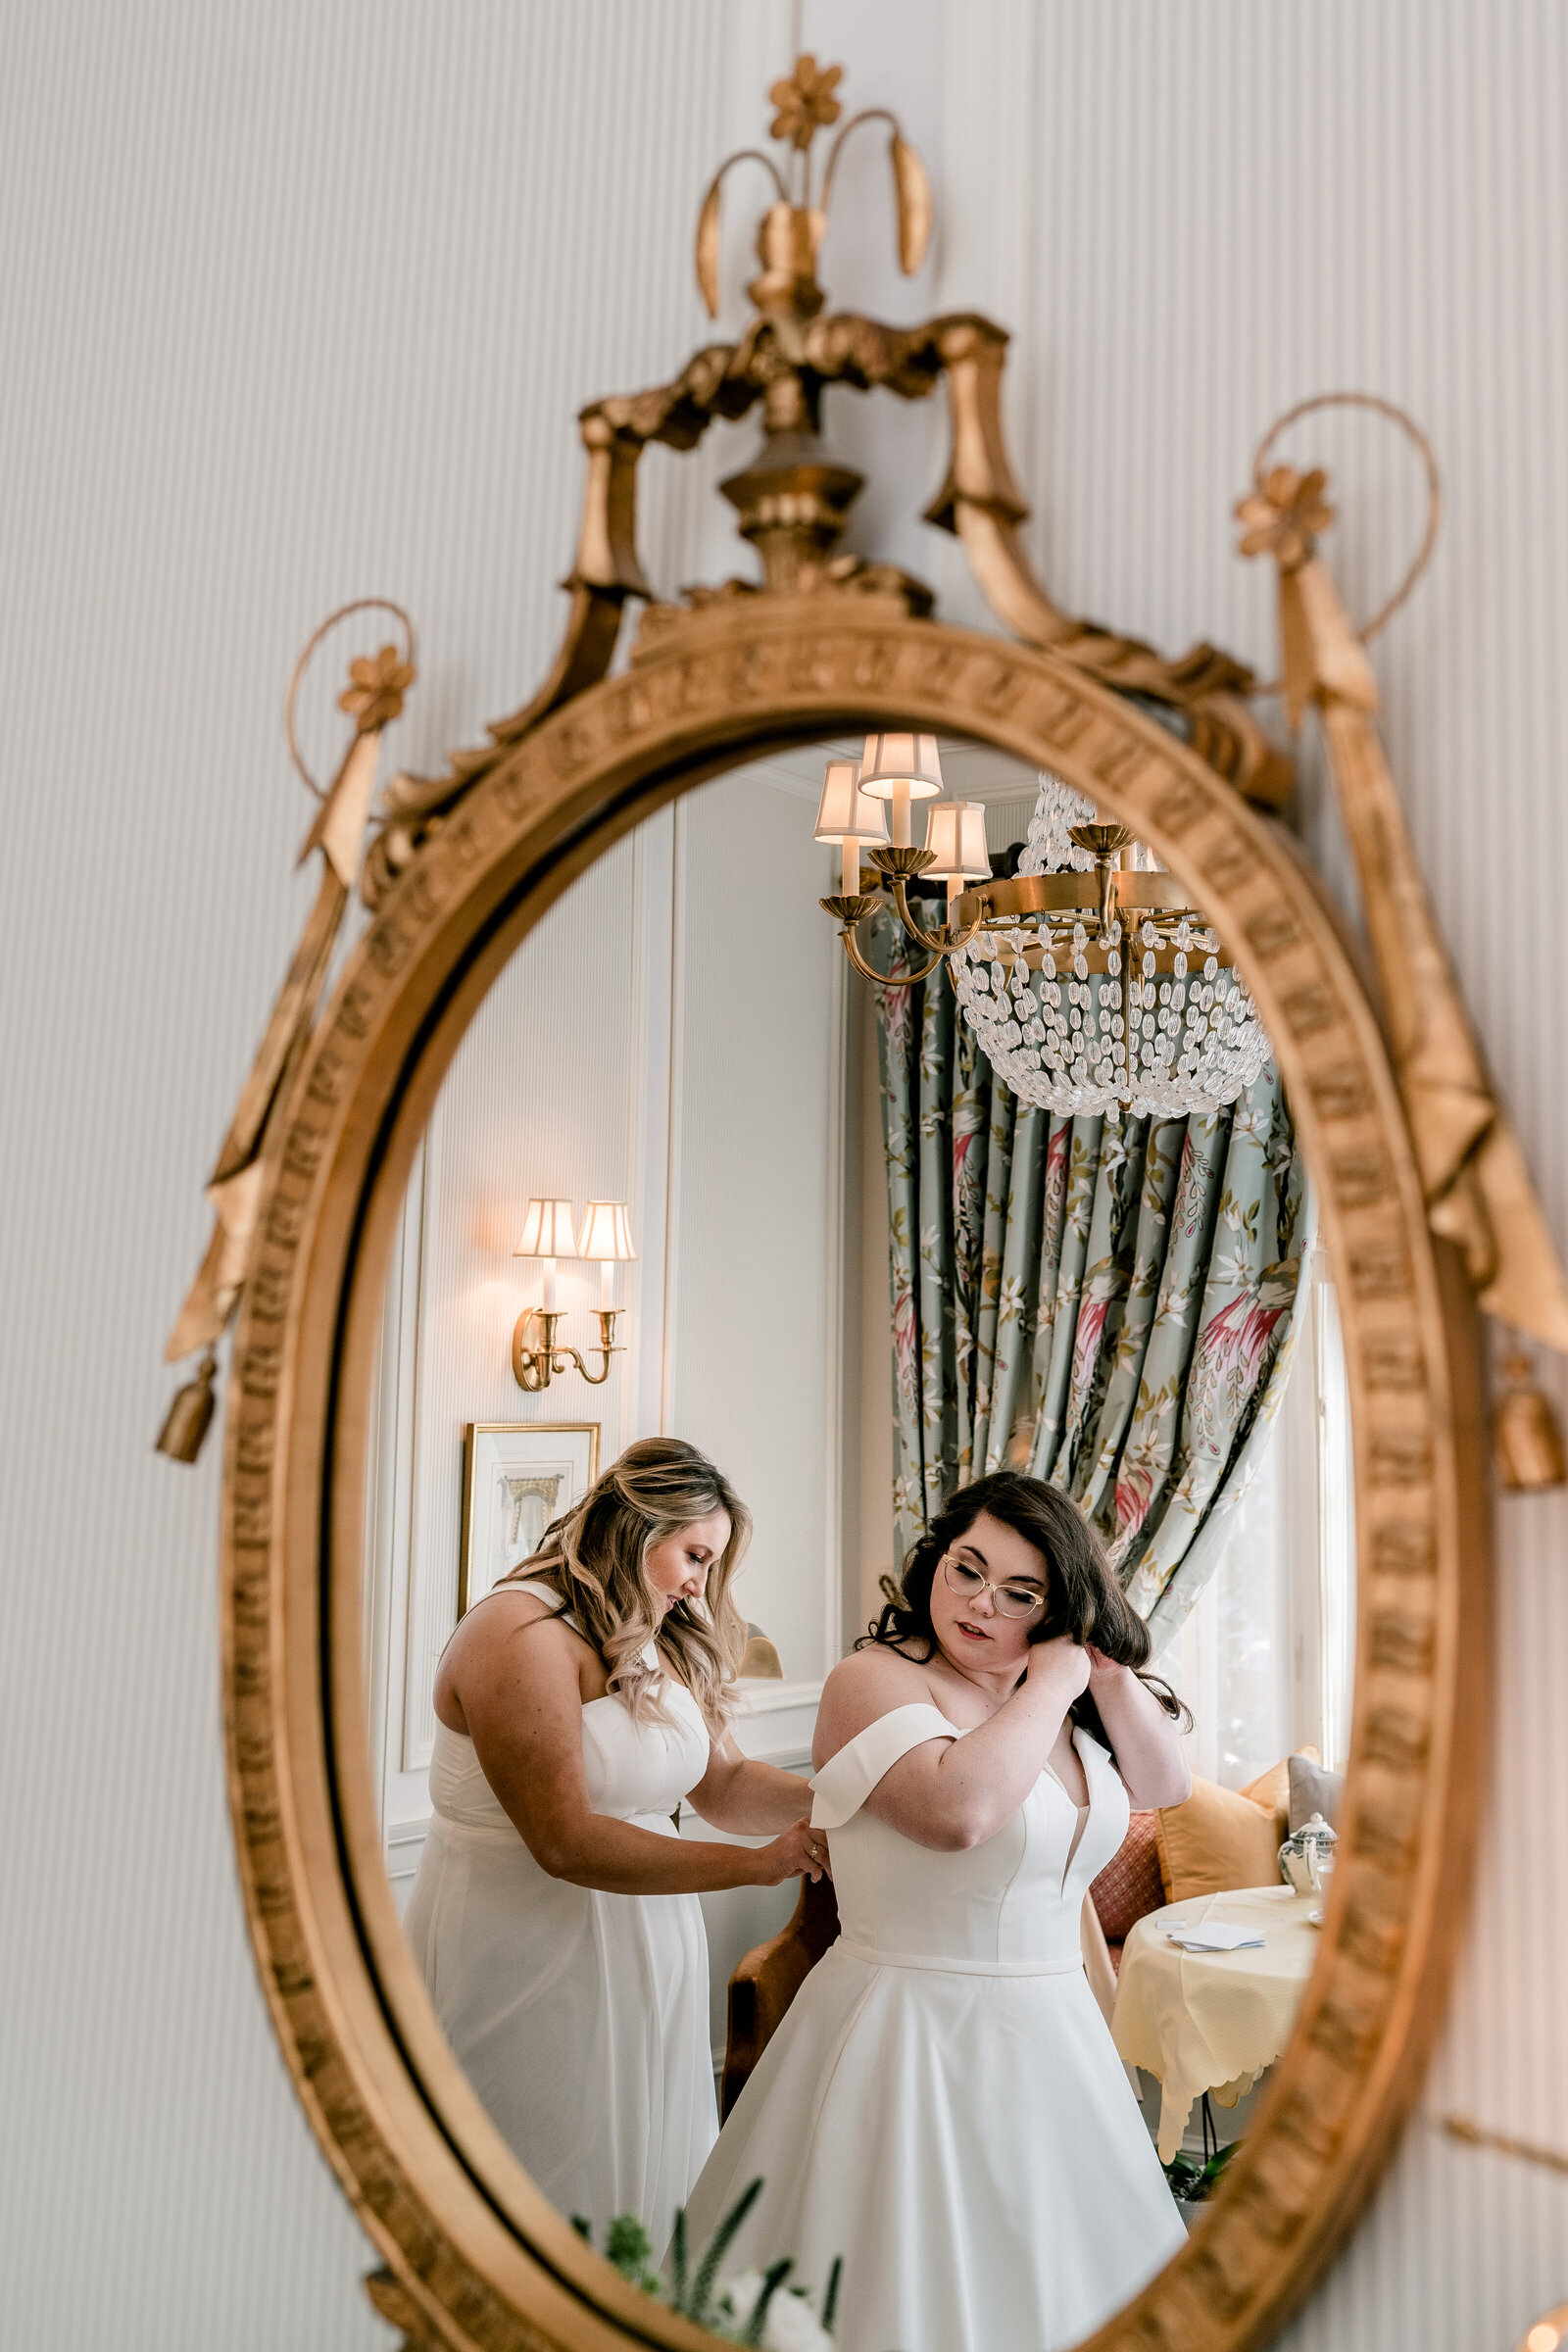 A bride getting ready with the help of her bridesmaid before a wedding at The Inn at Little Washington in Virginia